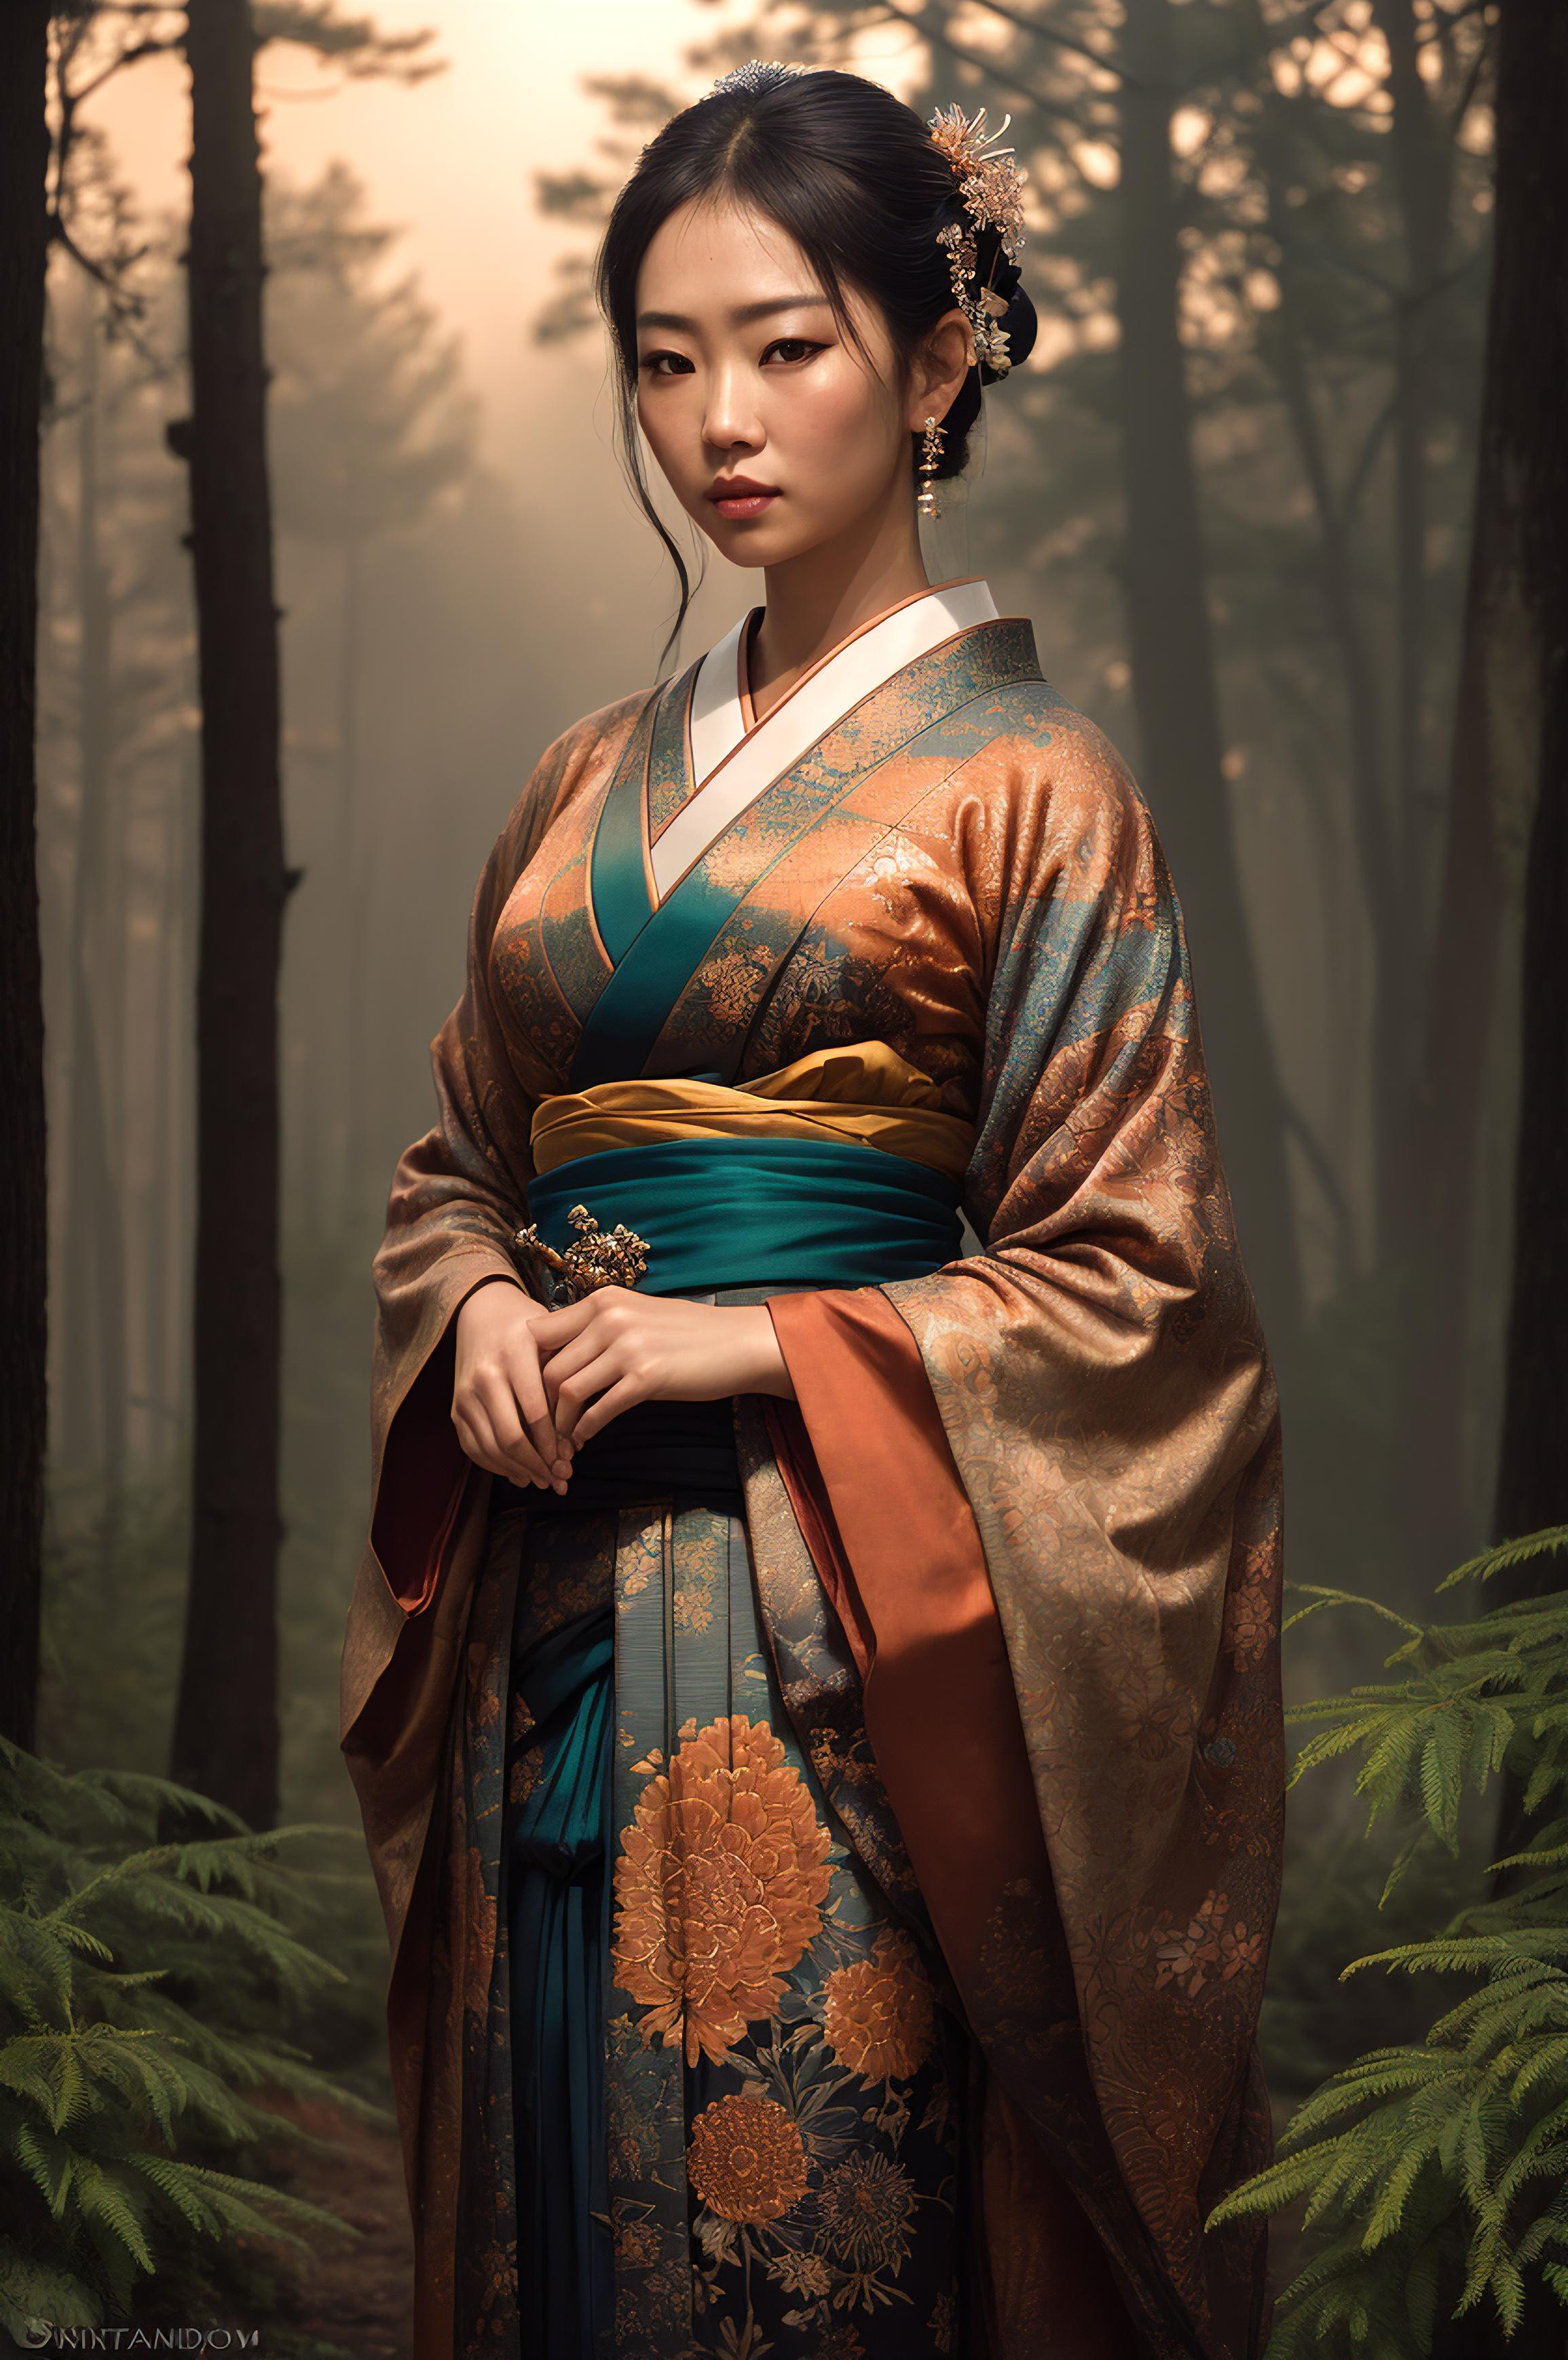 A woman dressed in traditional Japanese clothing stands in the woods.